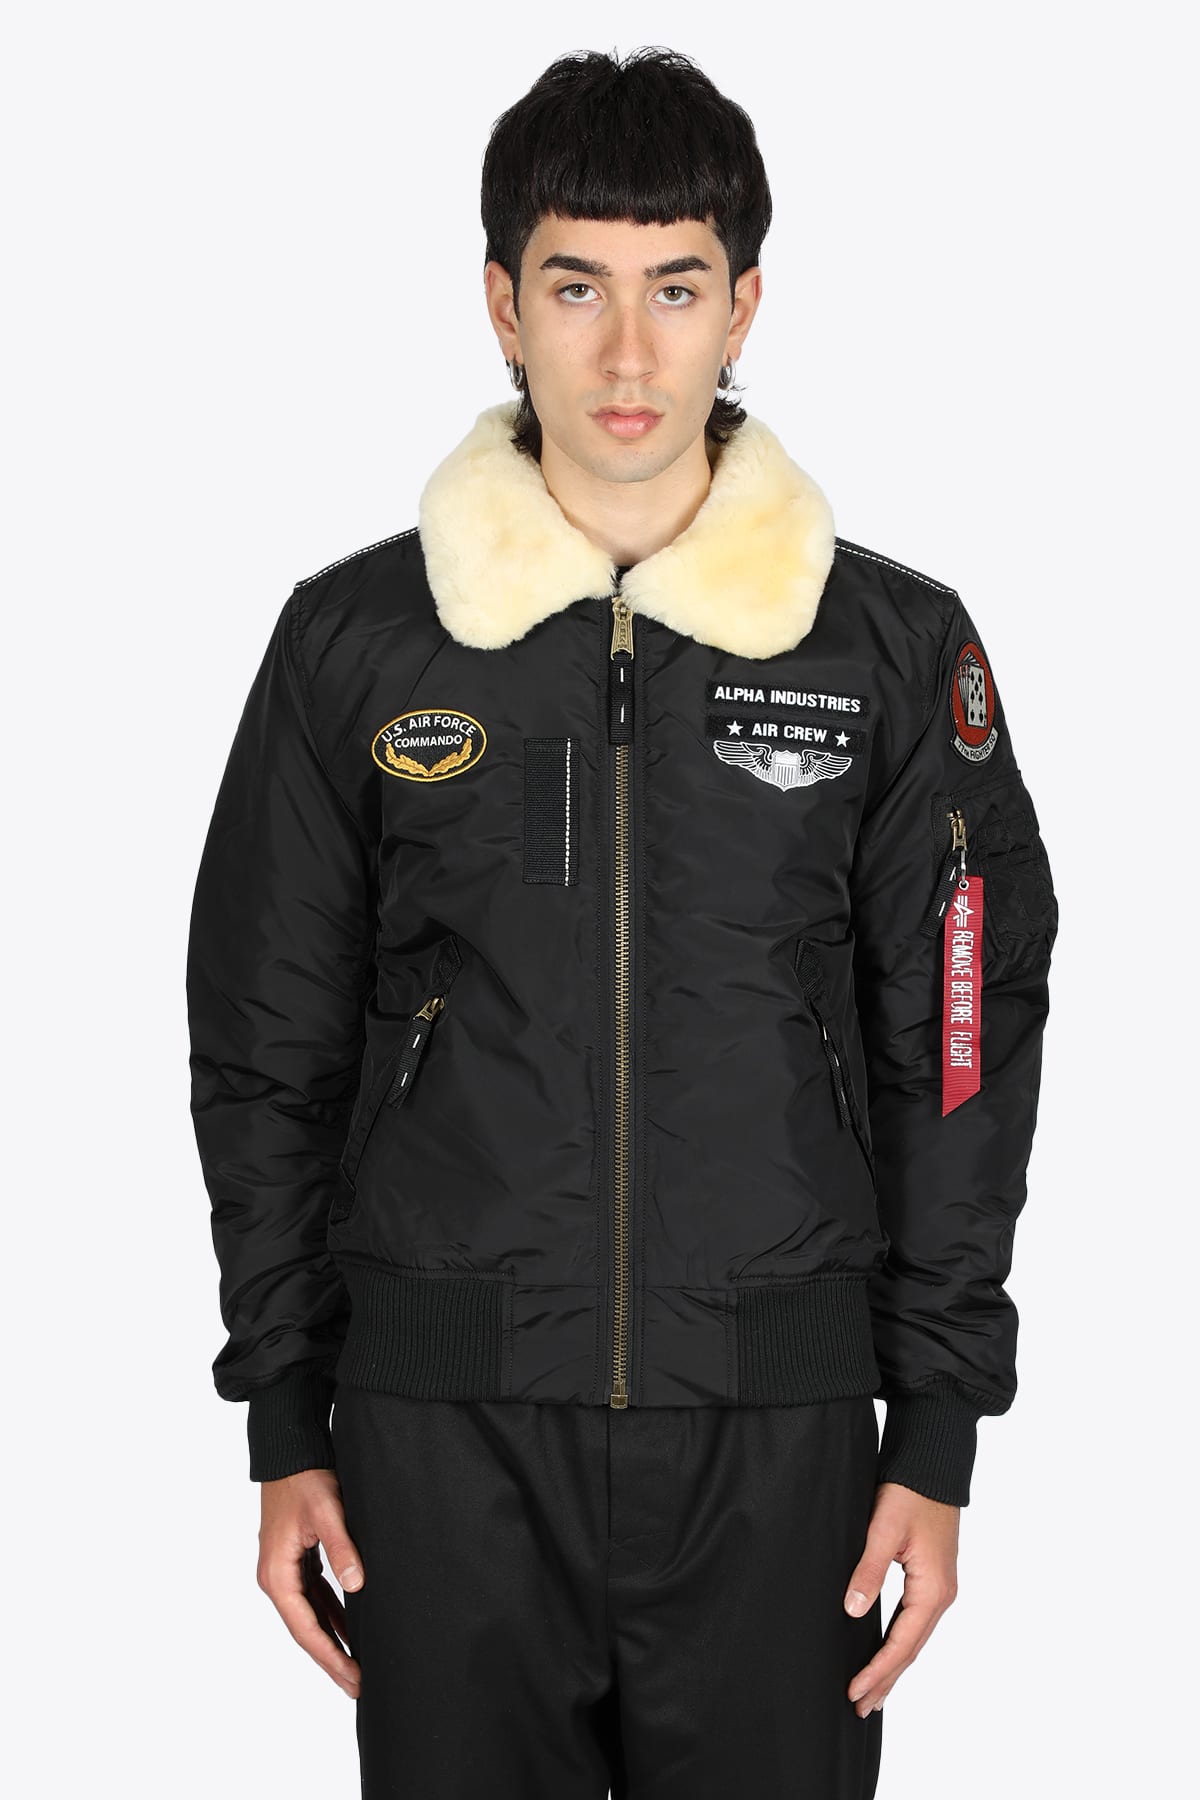 Alpha Industries Injector Iii Air Force Bomber Jacket Injector III air force bomber jacket